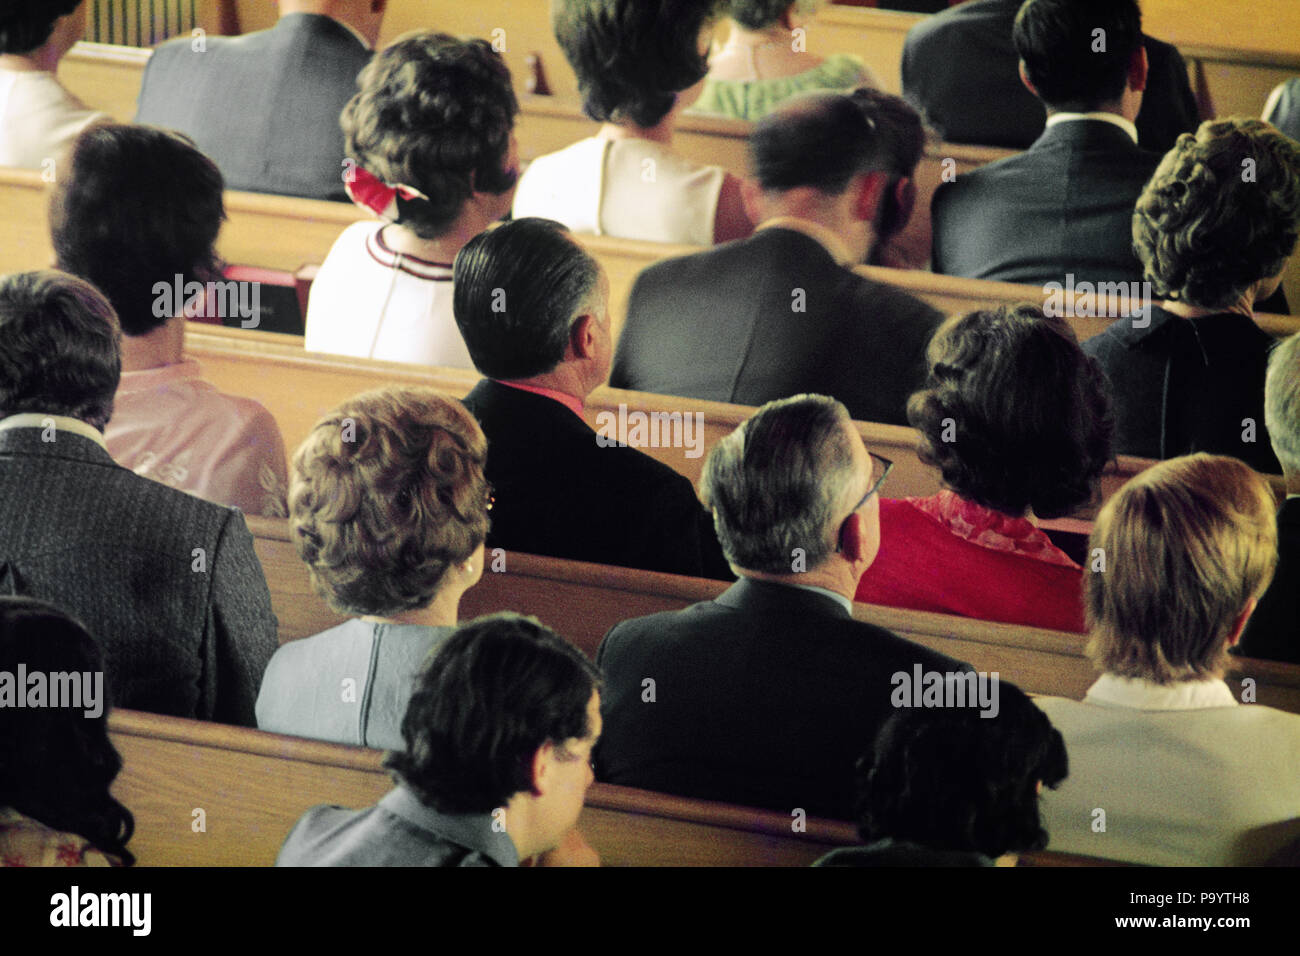 1980s ADULT MEN AND WOMEN PEOPLE SITTING IN CHURCH PEWS - kc6573 JAC002 HARS PERSONS INSPIRATION SIT MALES CHRISTIAN SPIRITUALITY FREEDOM CONGREGATION HAPPINESS HEAD AND SHOULDERS HIGH ANGLE RELIGIOUS STRENGTH AND ATTENTION CHOICE CHRISTIANITY POWERFUL REAR VIEW IN AUTHORITY CONNECTION BELIEVER PEWS FAITHFUL BACK VIEW PEW REARVIEW TOGETHERNESS ATTENTIVE CAUCASIAN ETHNICITY OLD FASHIONED PROTESTANT Stock Photo